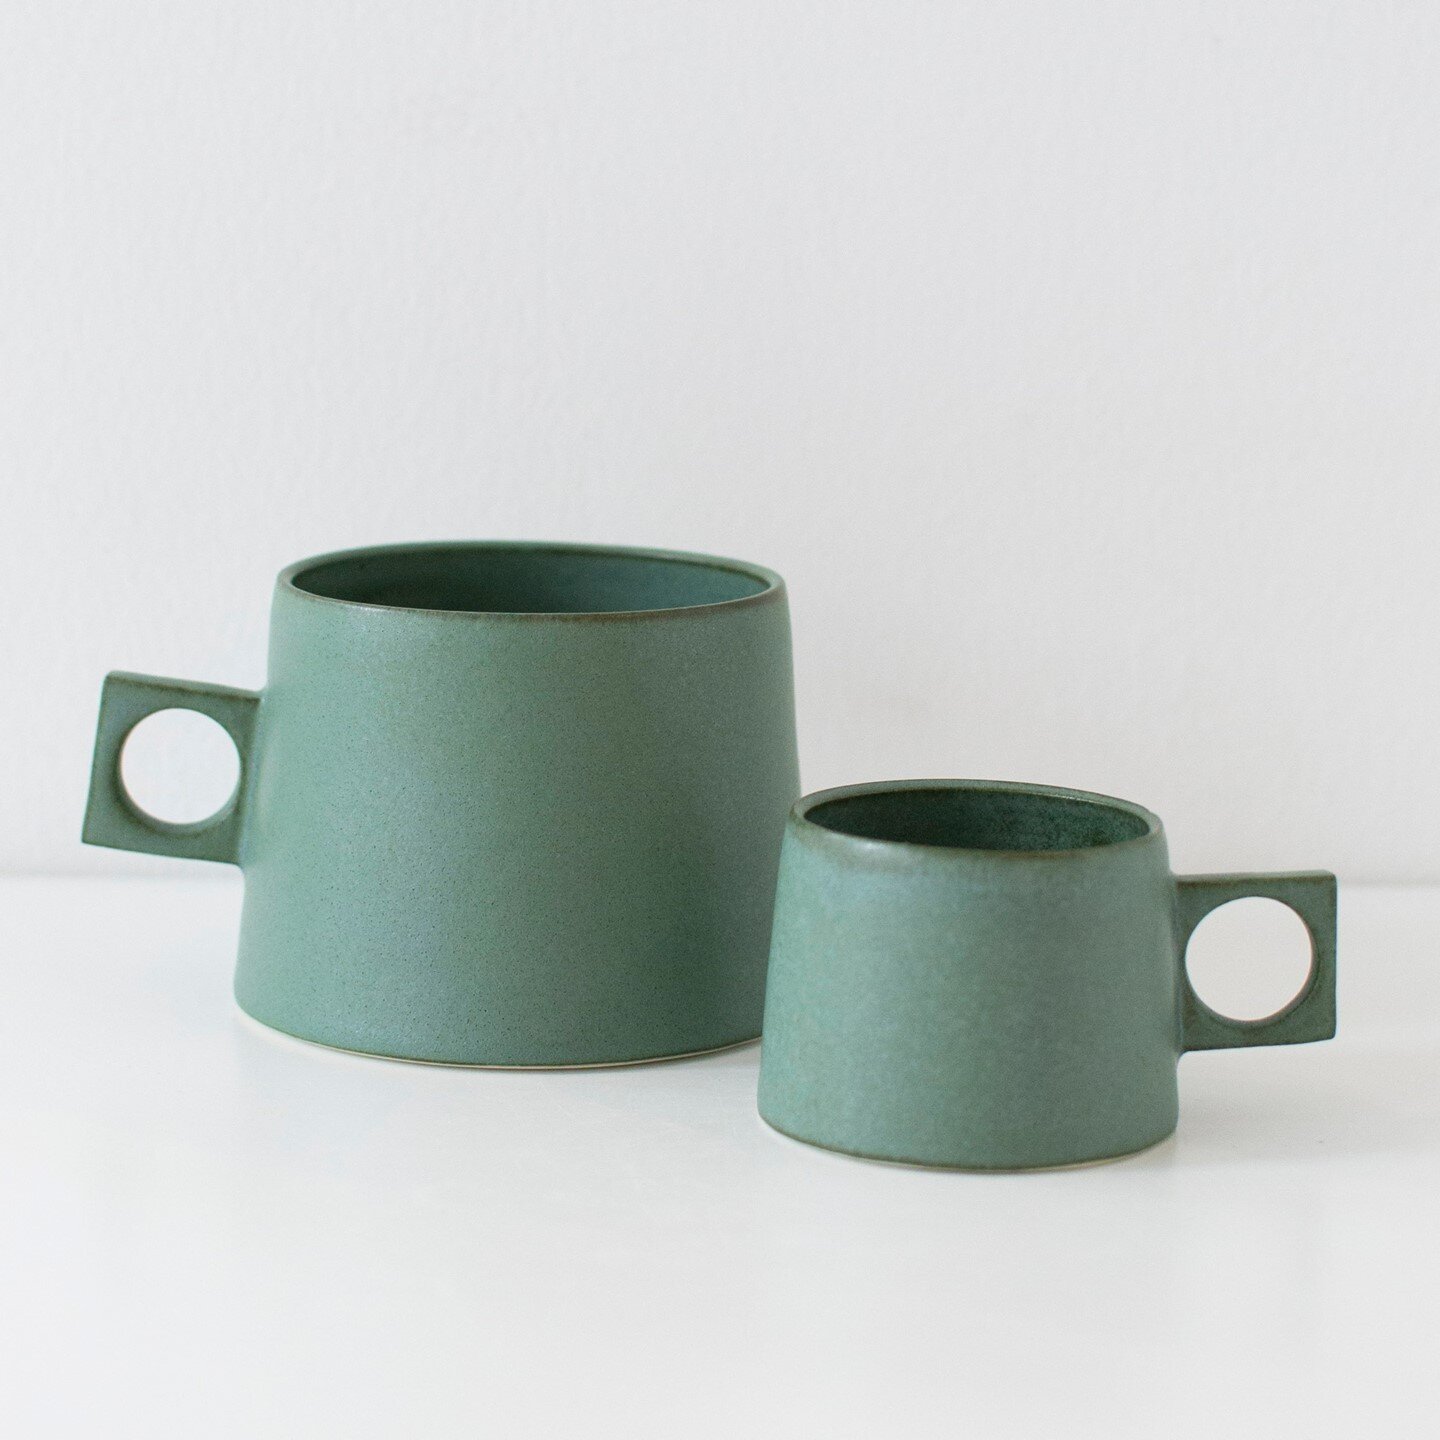 New to the gallery! Wonderful ceramics by Vicky Hageman @vichageman 😍 We're so excited to have Vicky's stunning work. You can find the range in the gallery and now online too!⁠
⁠
www.cambridgecrafts.co.uk/vicky-hageman⁠
⁠
⁠
⁠
#cambridge #lovecambrid